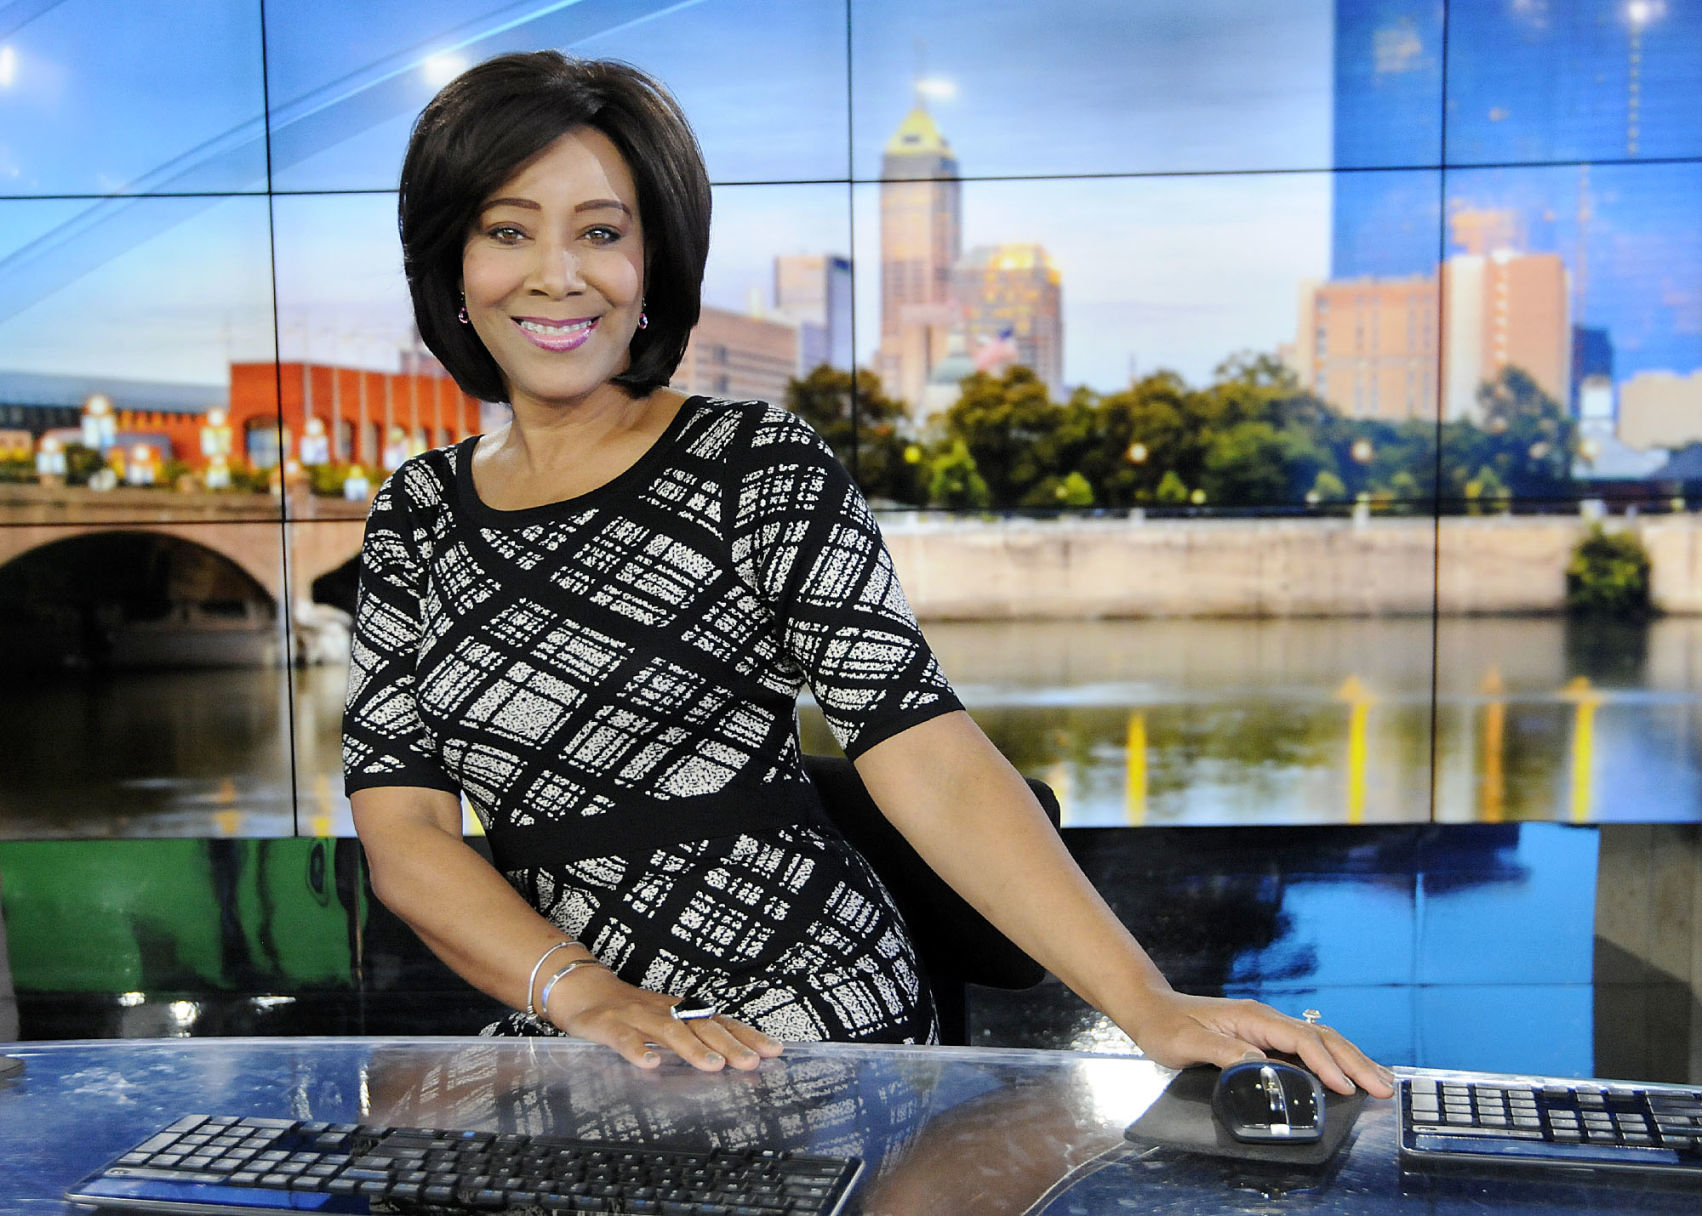 Grateful to be alive Newscaster Andrea Morehead completes treatment